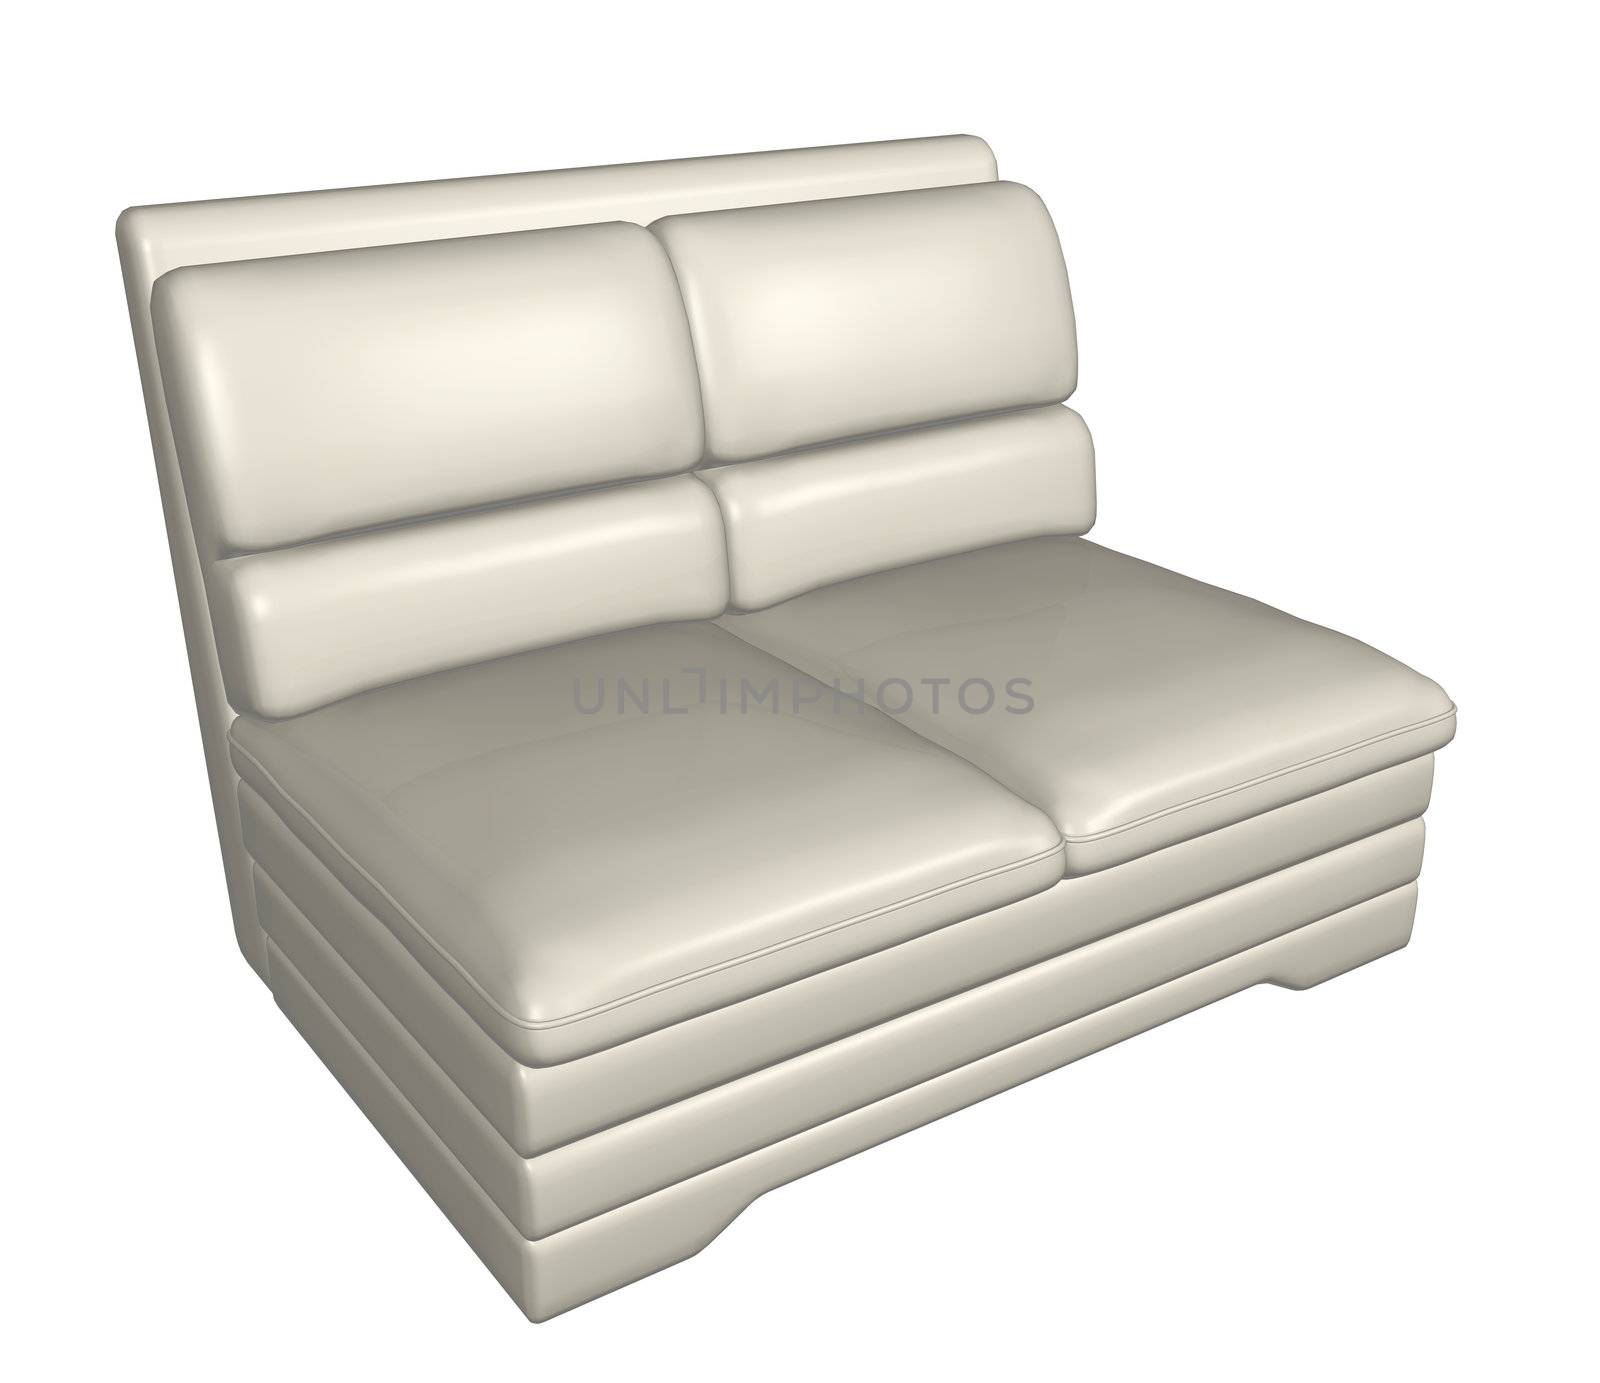 Two-seater all-leather sofa, 3D illustration by Morphart